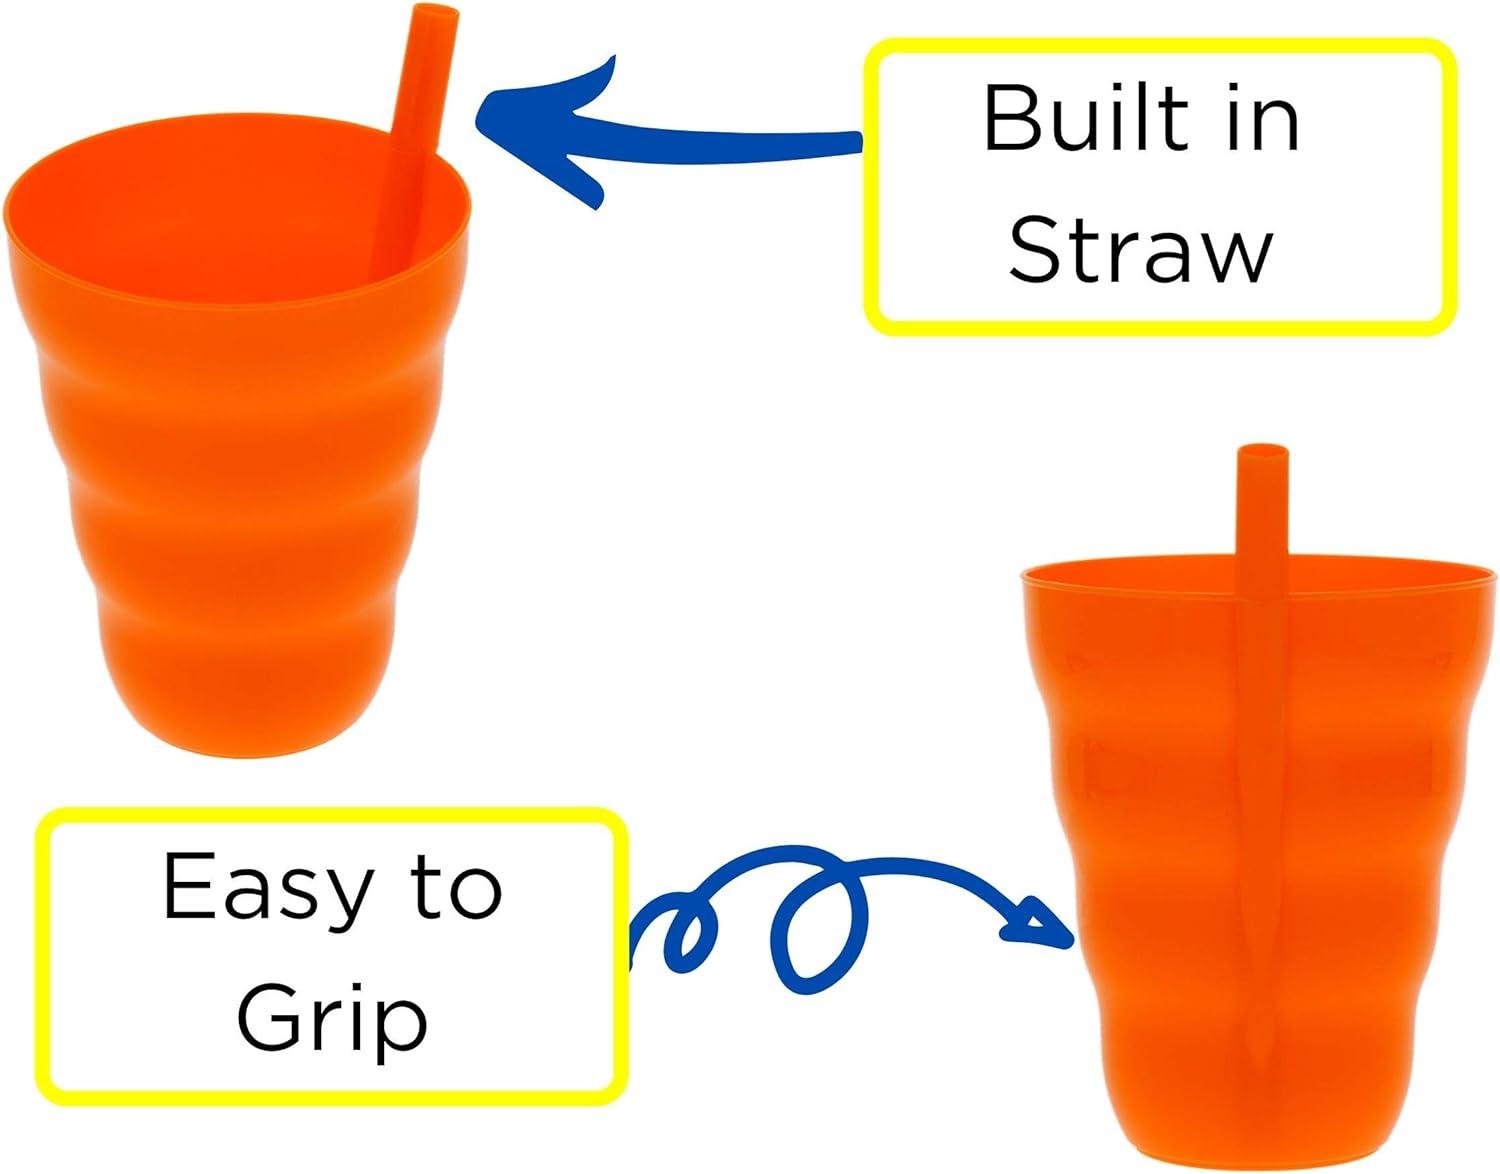 Cup with Built-In Straw